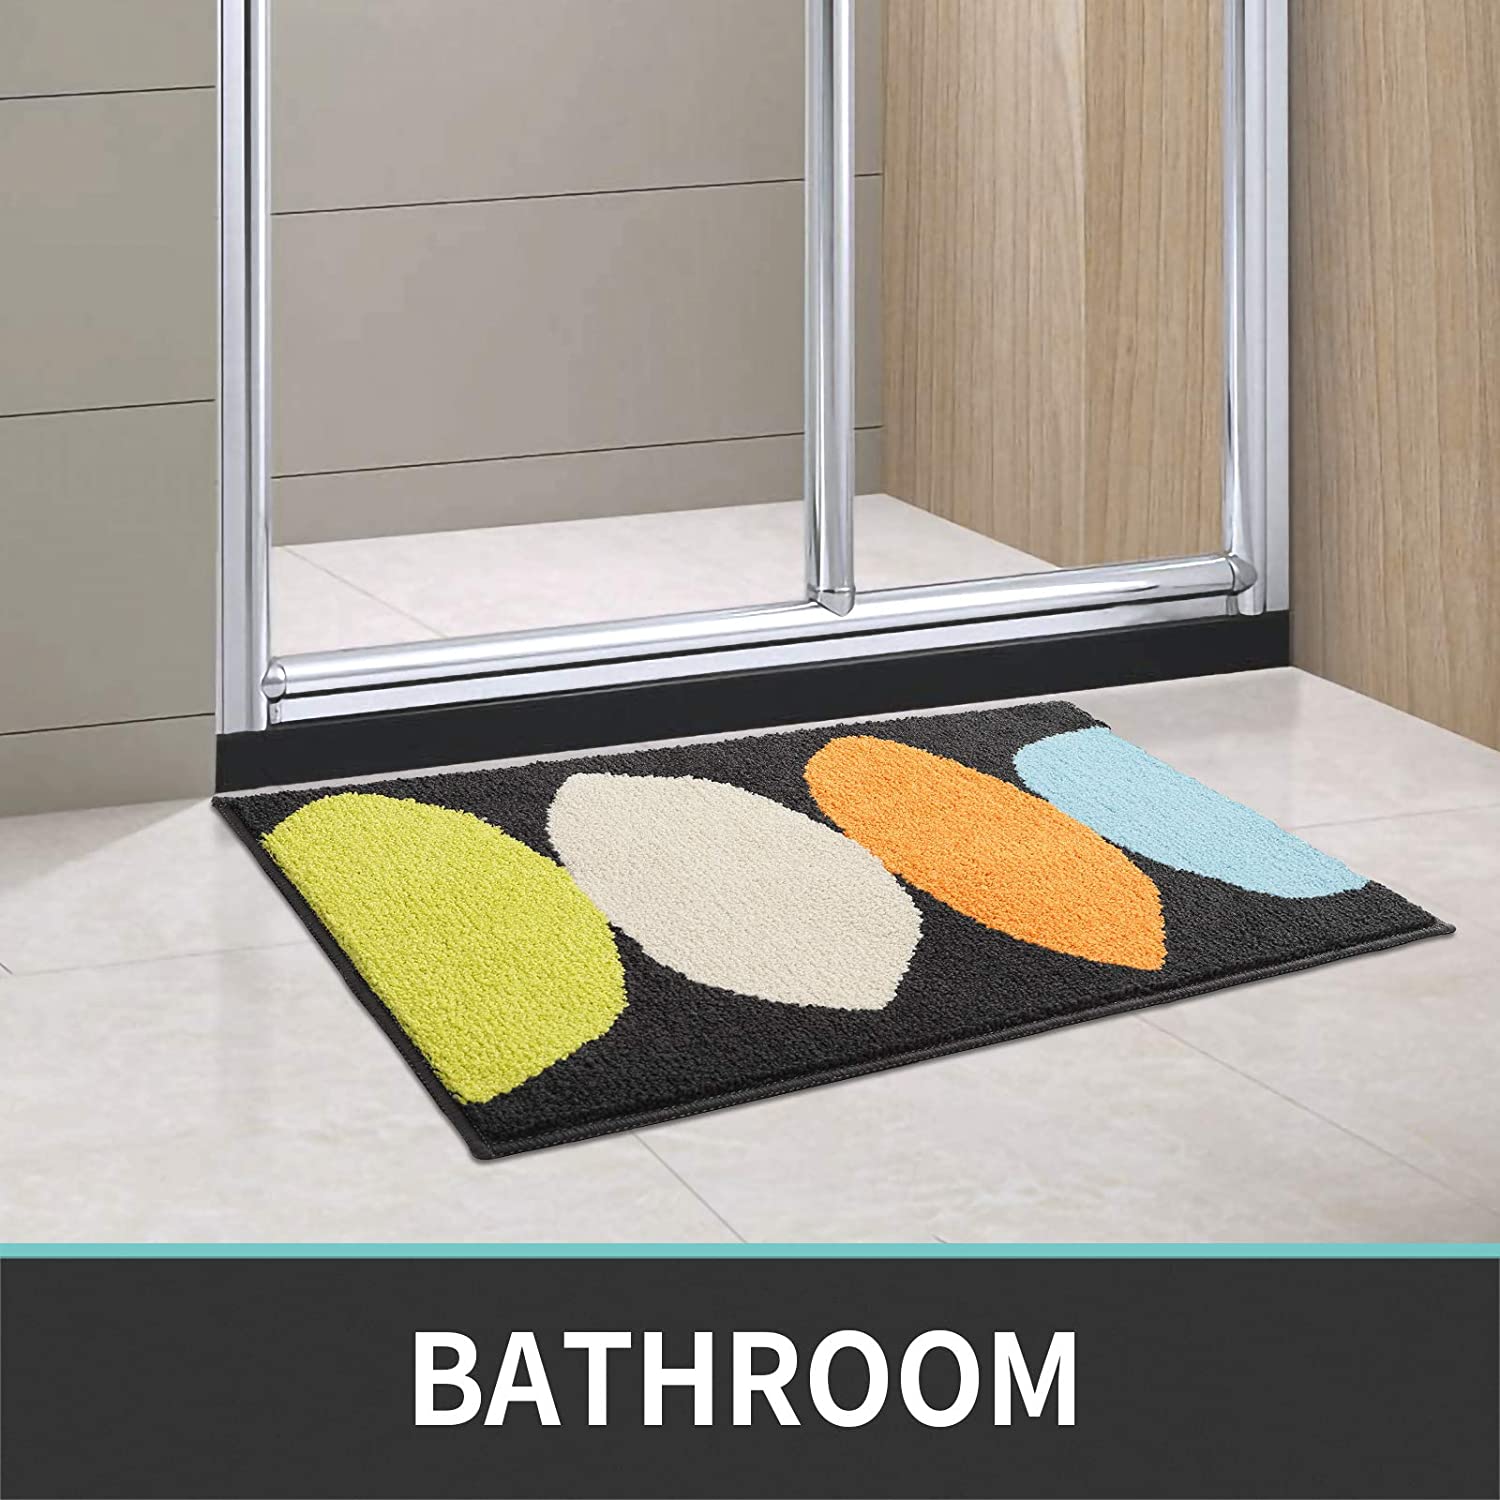 DEXI Bath Mat Bathroom Rug Absorbent Non-Slip Washable Shower Floor Mats  Small Carpet 16x24,Turquoise Teal and White